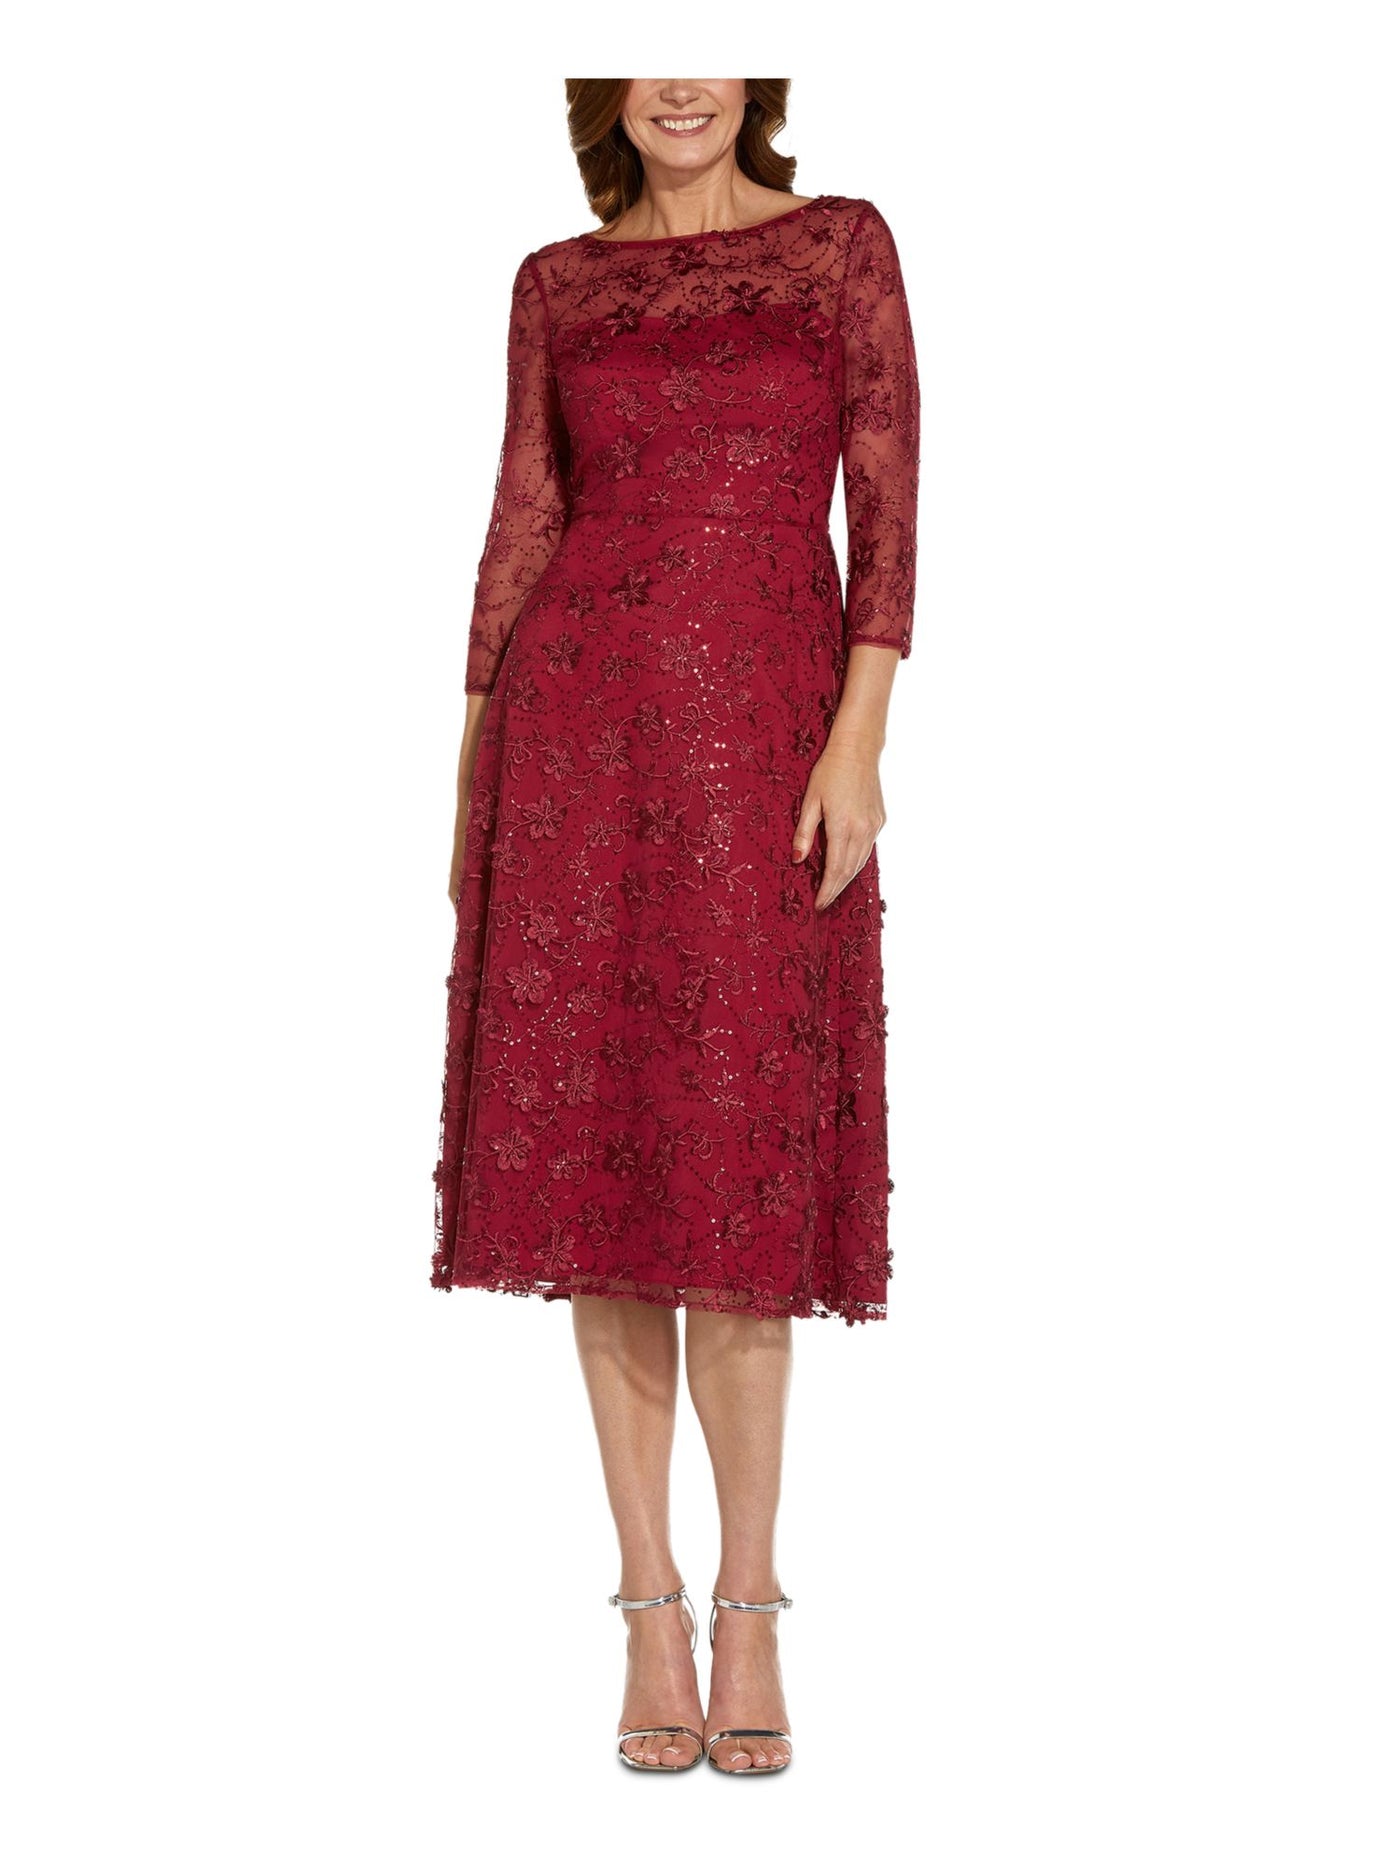 ADRIANNA PAPELL Womens Red Sequined Sheer Zippered Lined 3/4 Sleeve Boat Neck Below The Knee Evening Fit + Flare Dress 6